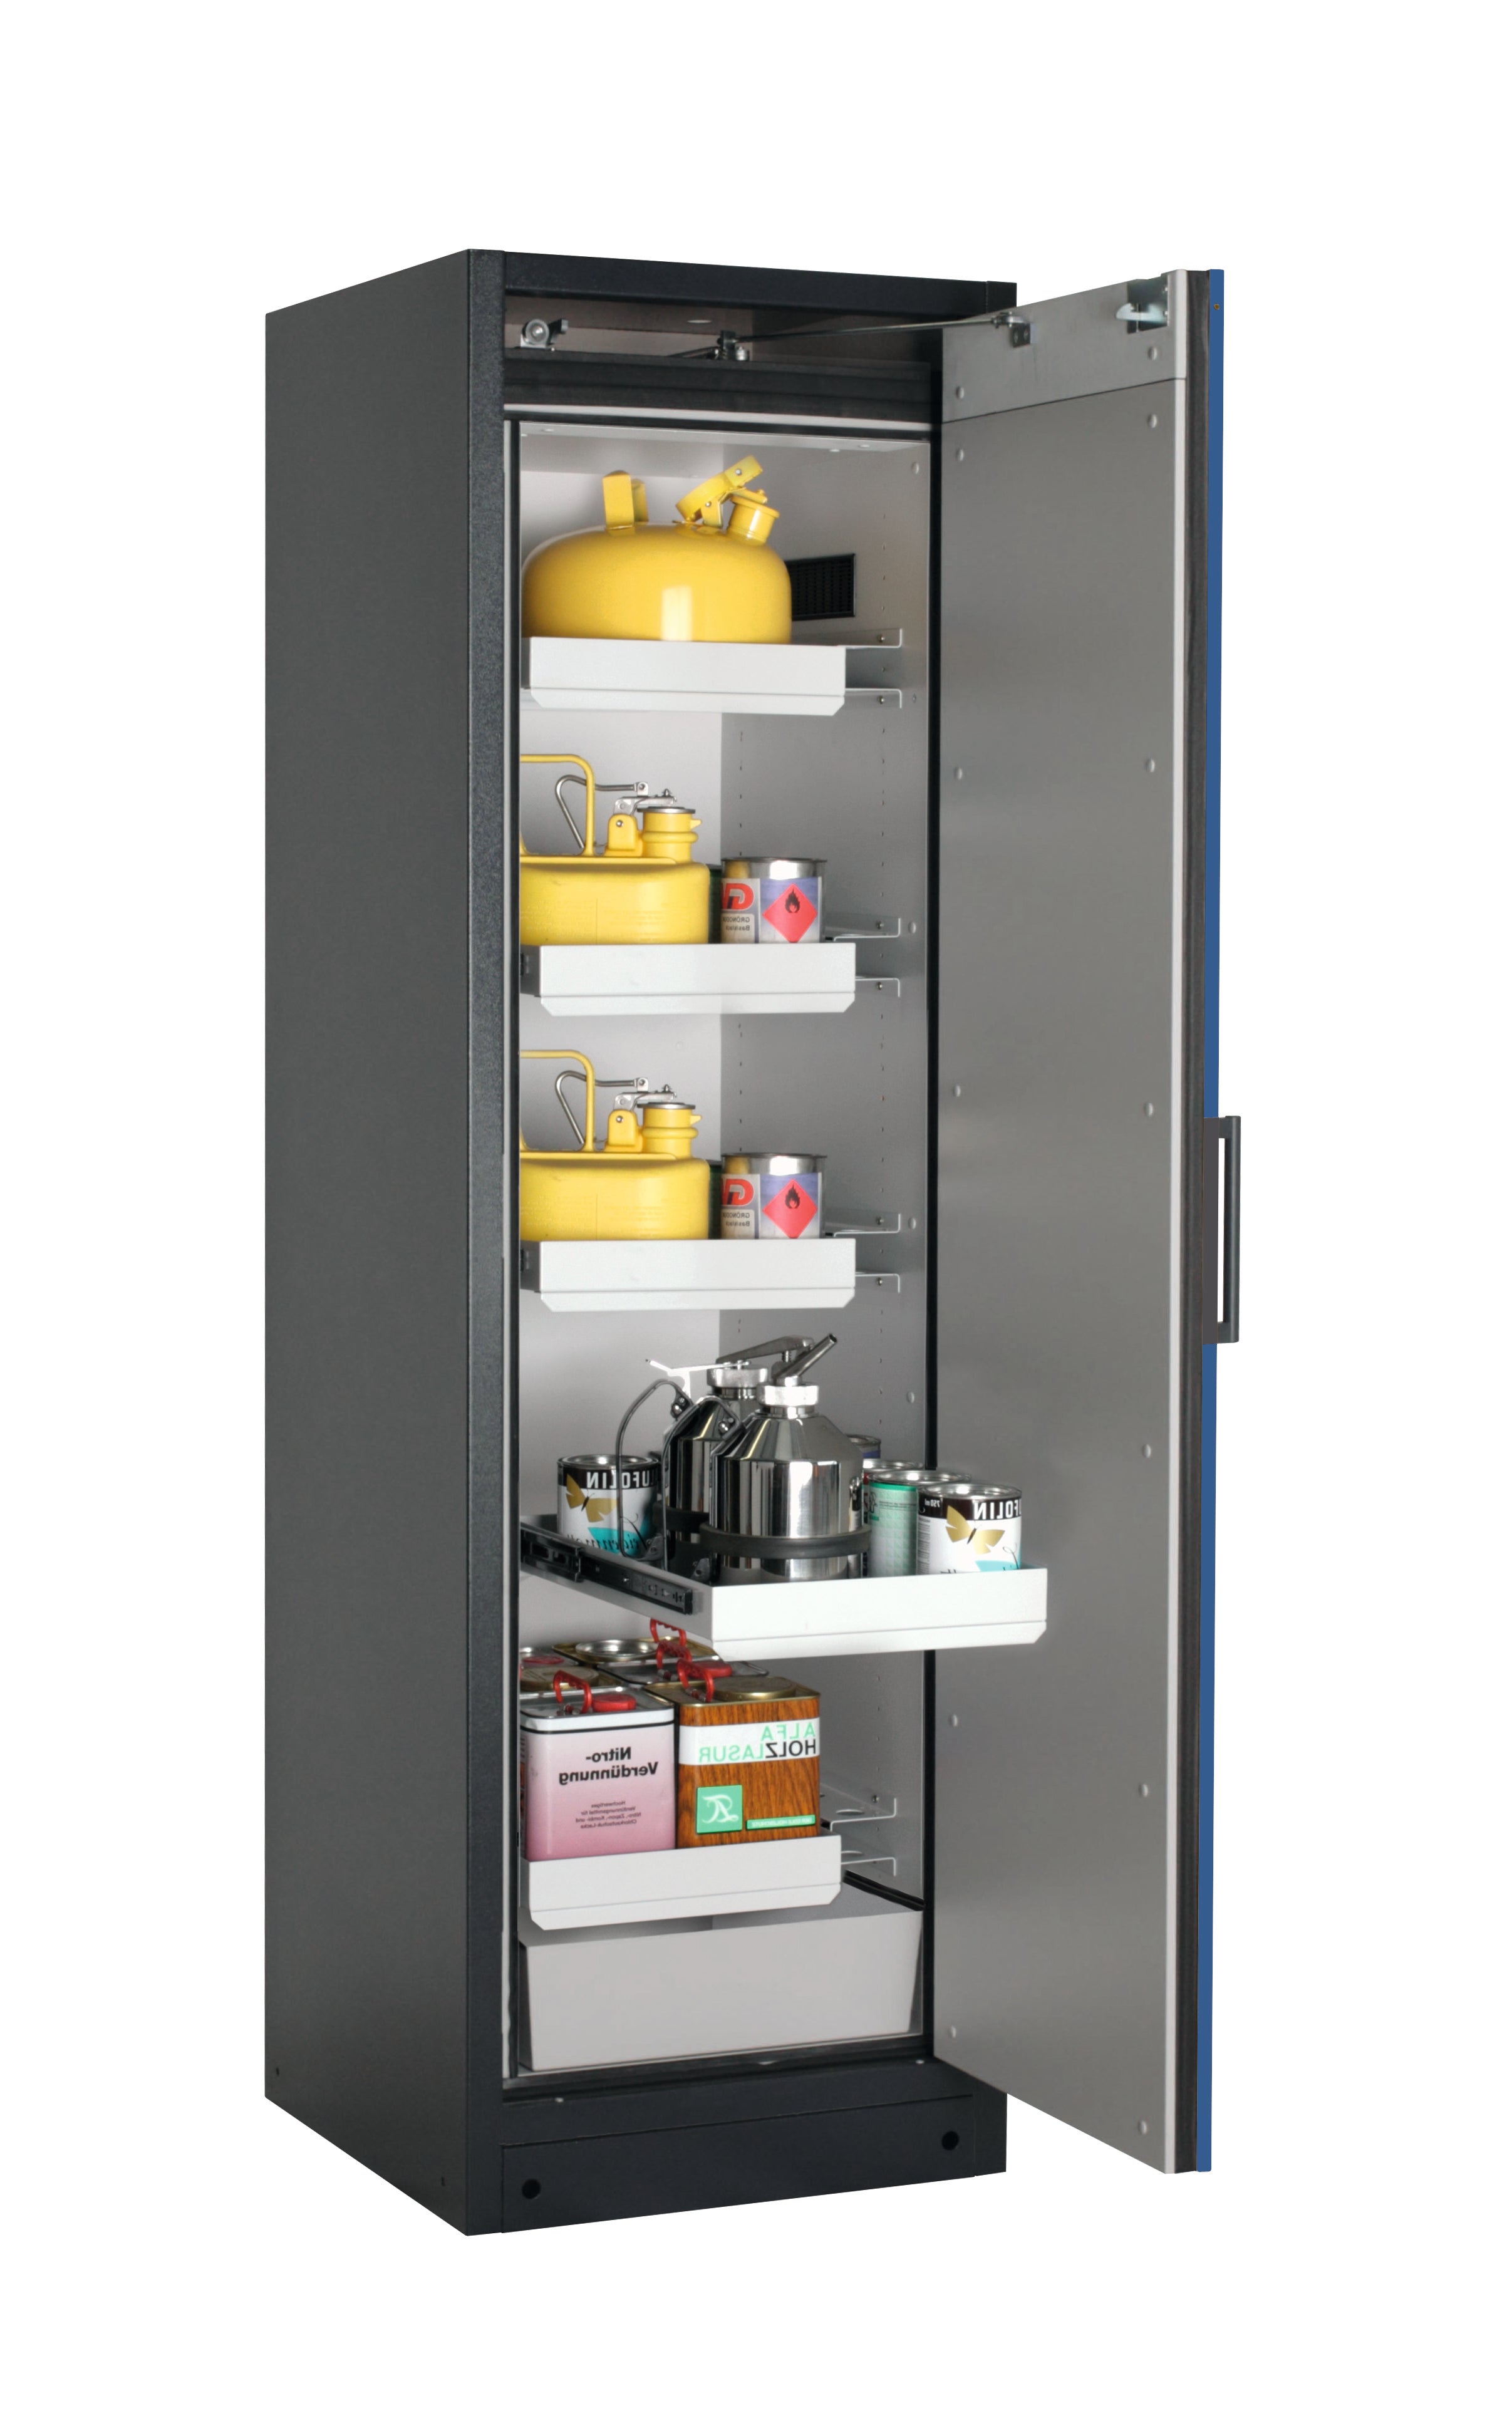 Type 90 safety storage cabinet Q-CLASSIC-90 model Q90.195.060.R in gentian blue RAL 5010 with 4x drawer (standard) (sheet steel),